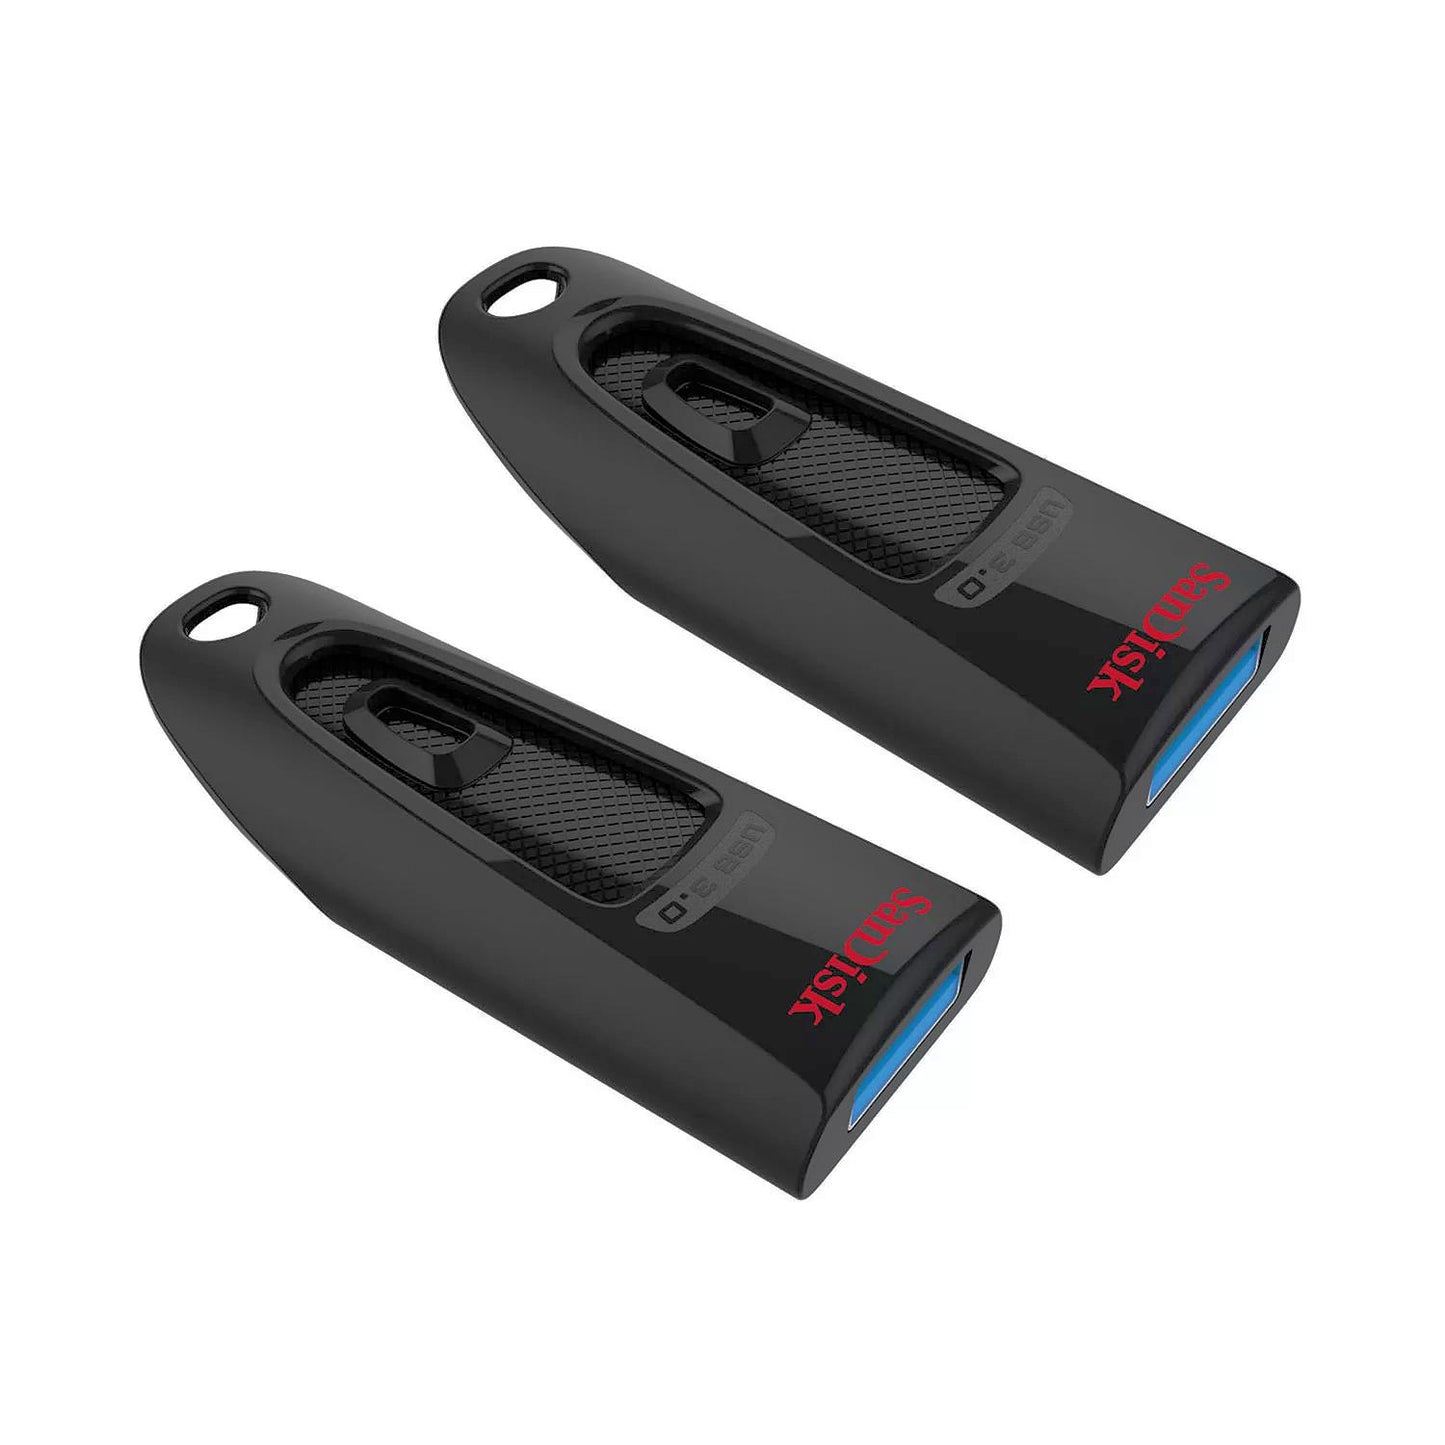 SanDisk 64GB Ultra USB 3.0 Flash Drive (2 Pack) Secure Encryption 130MB/s Read Speed